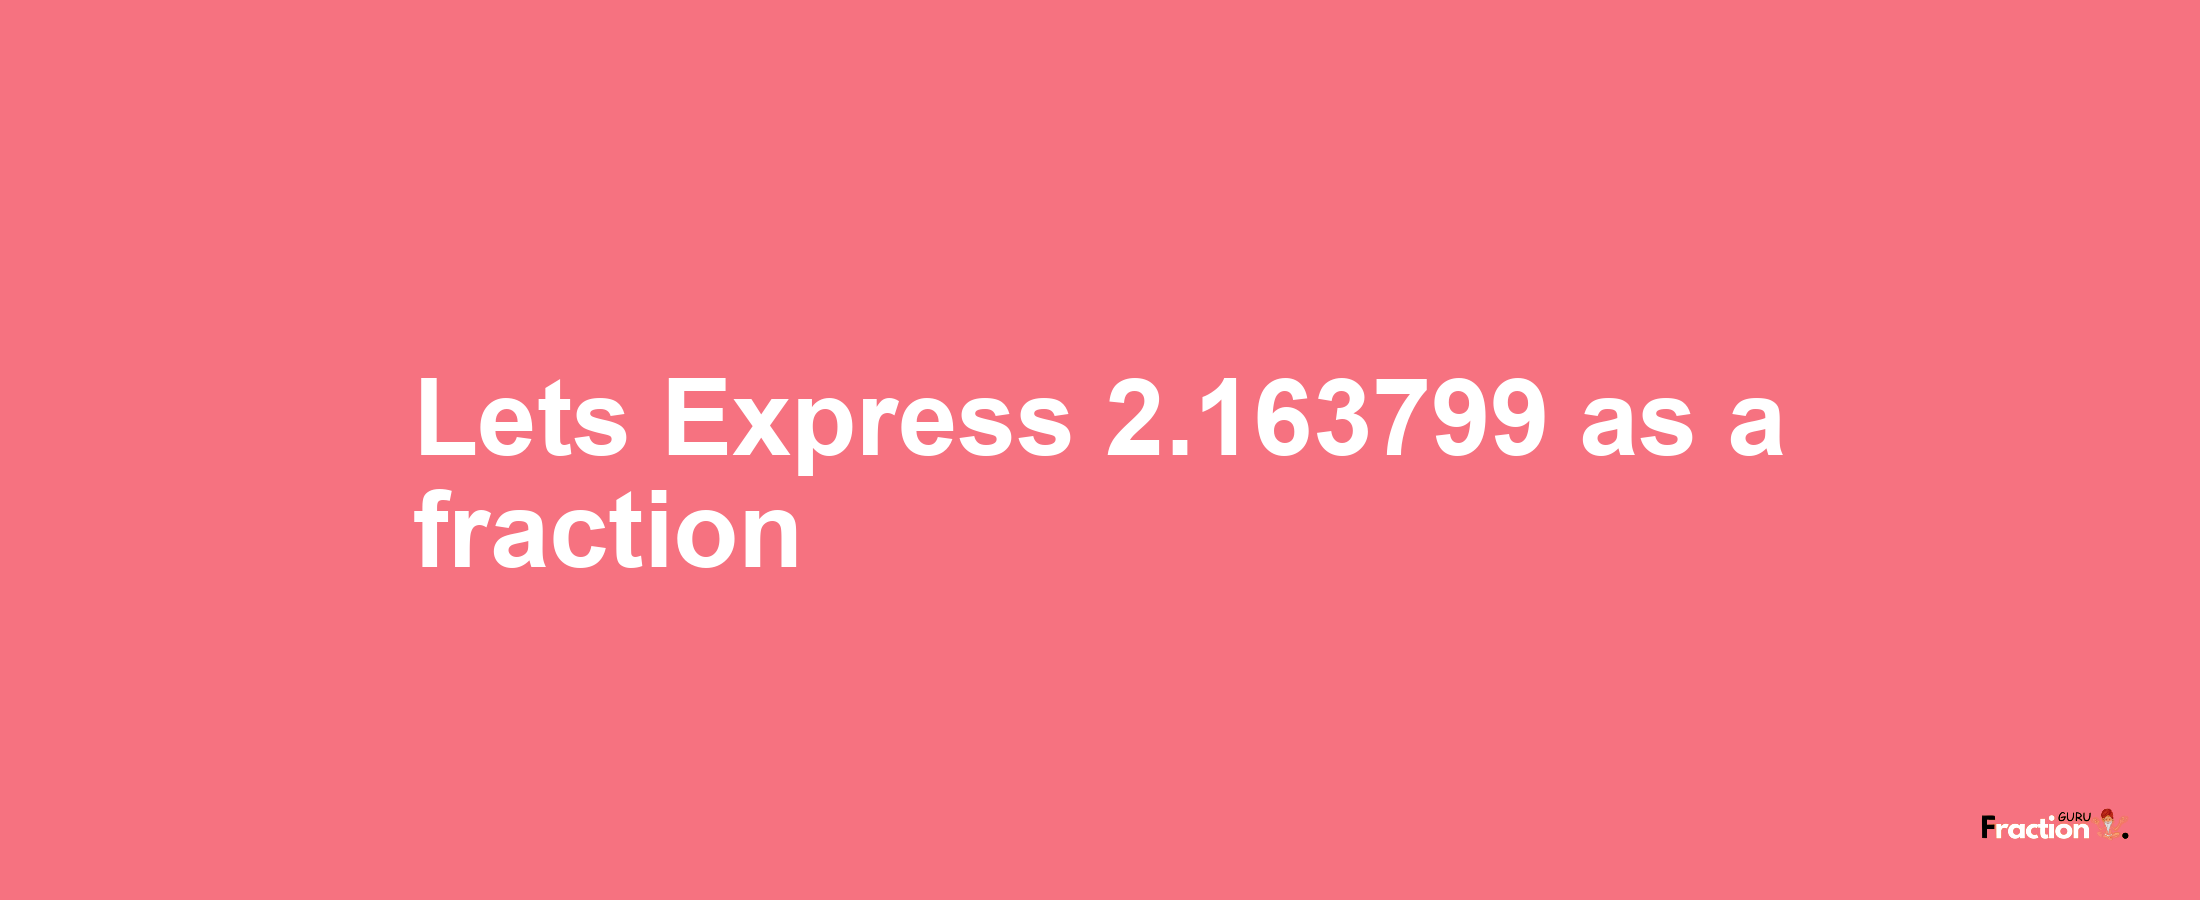 Lets Express 2.163799 as afraction